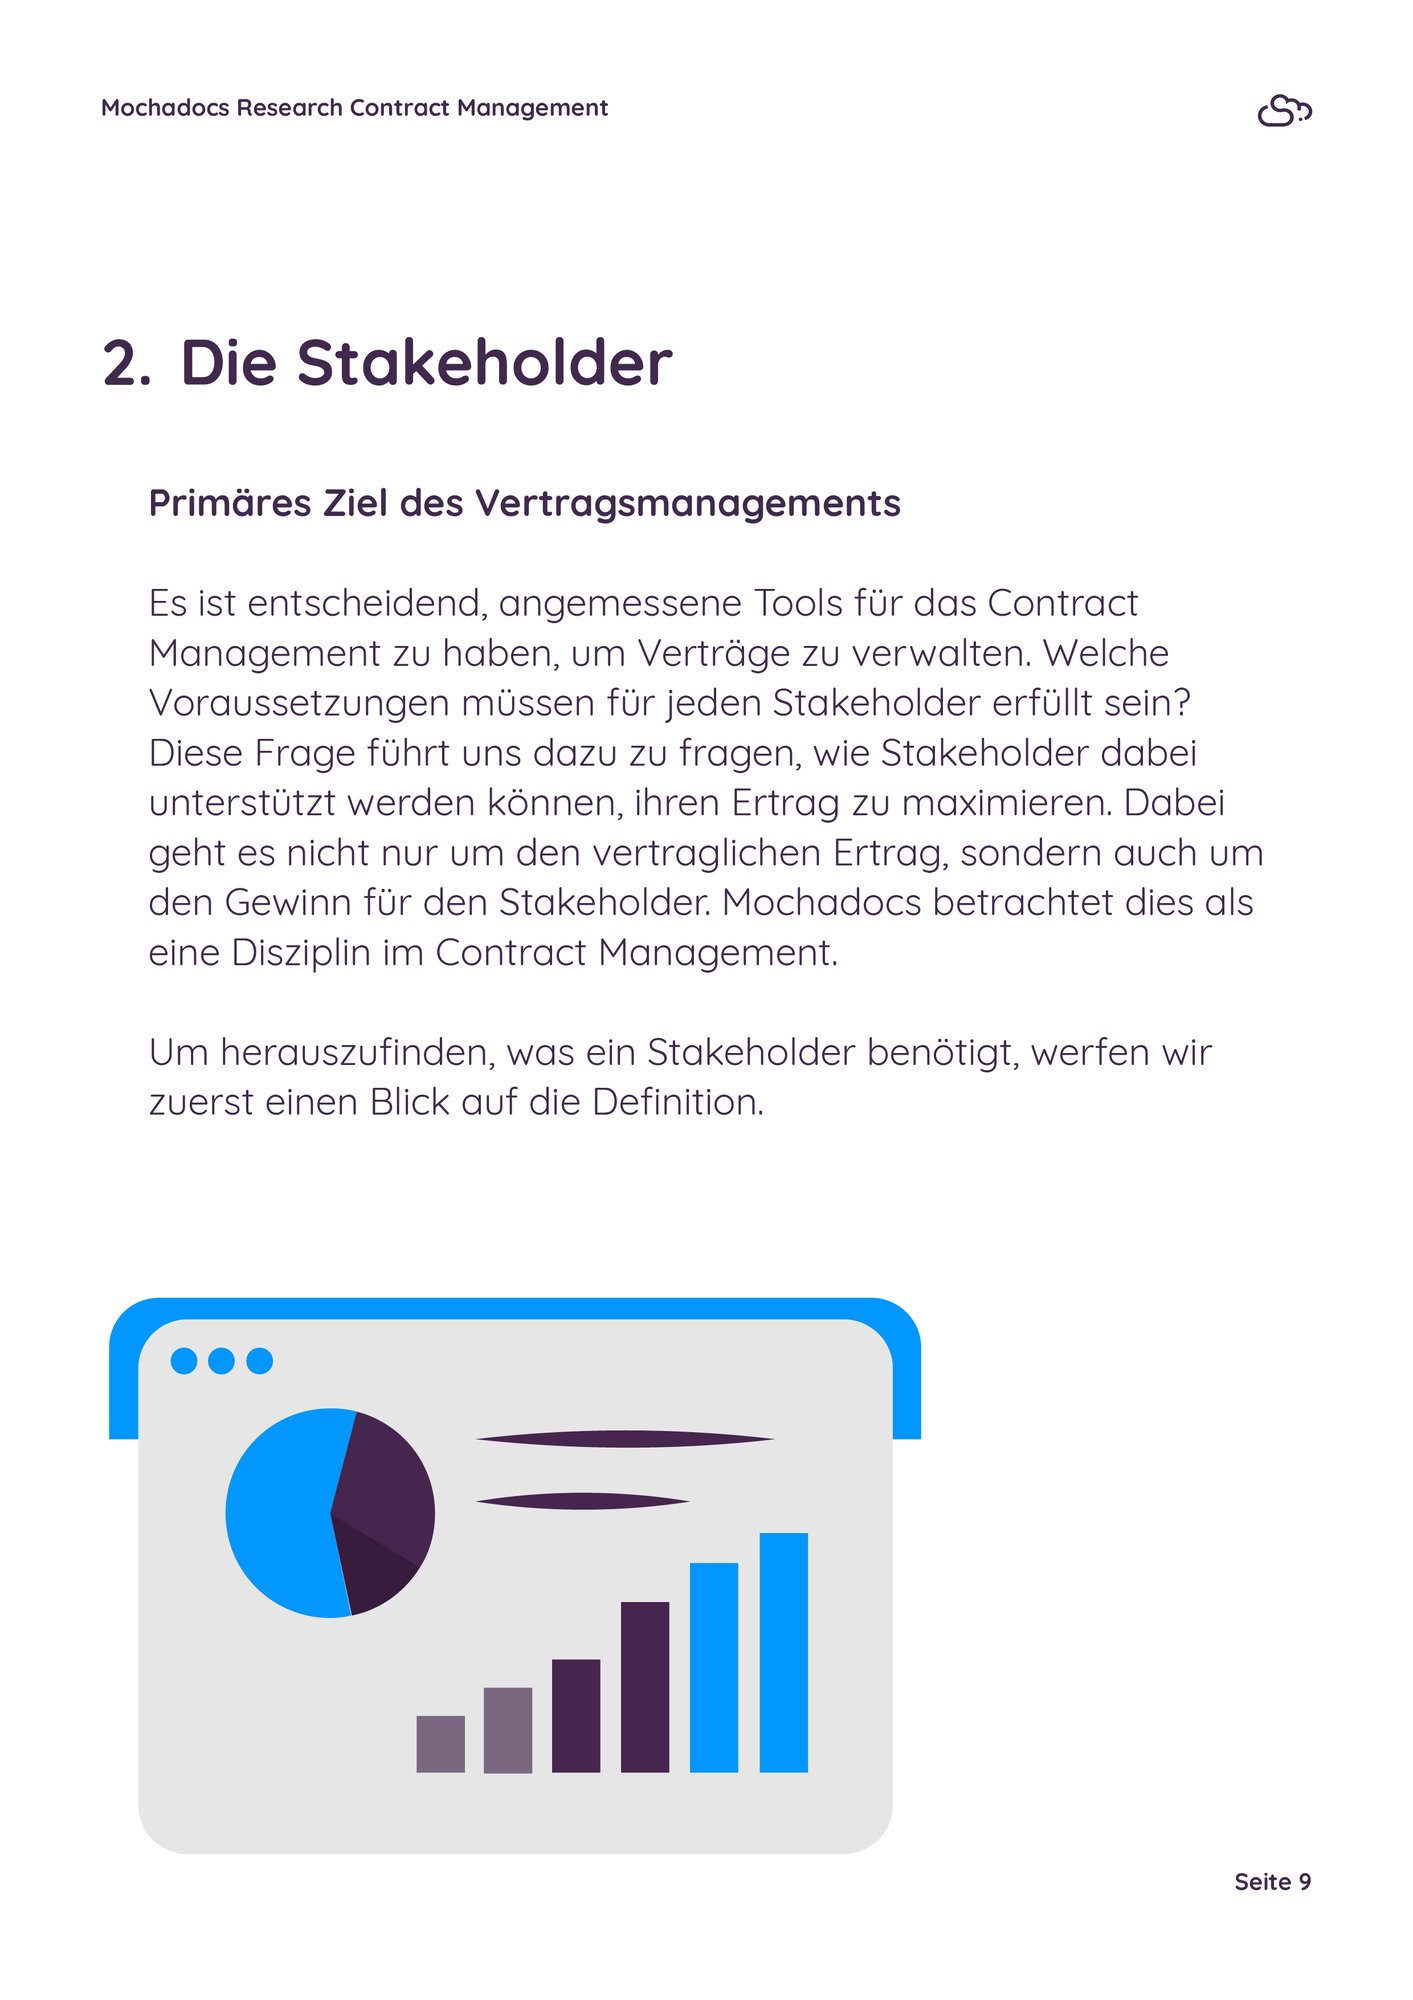 DE - The Contract Management Stakeholder9